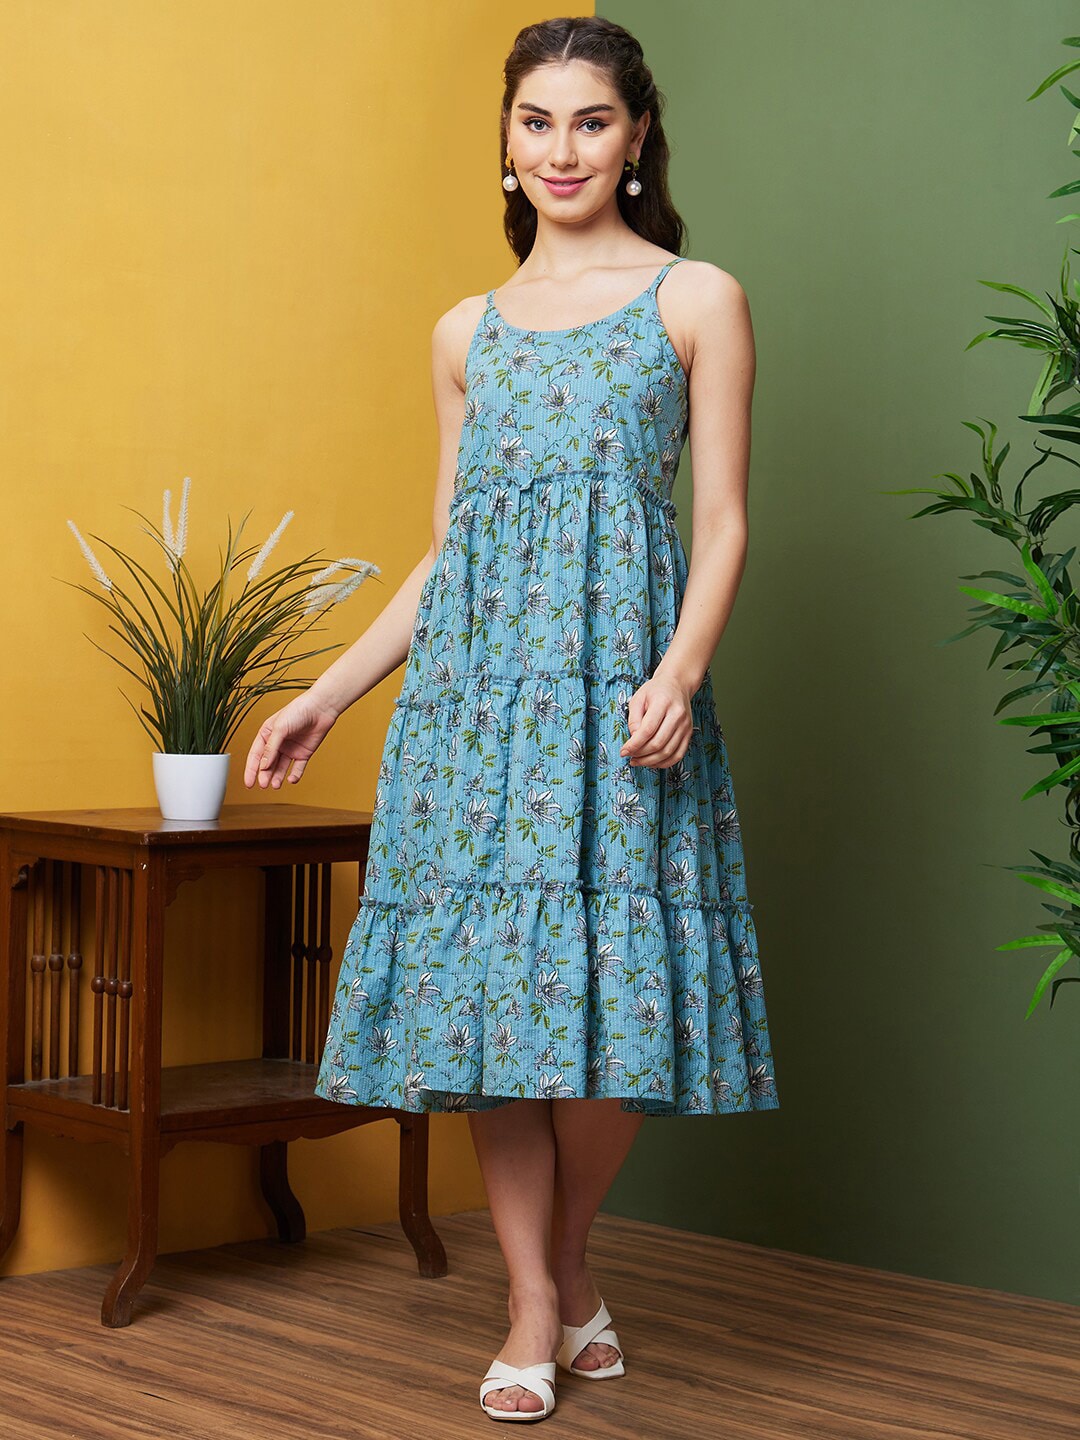 Globus Floral Printed Pure Cotton A-Line Dress Price in India